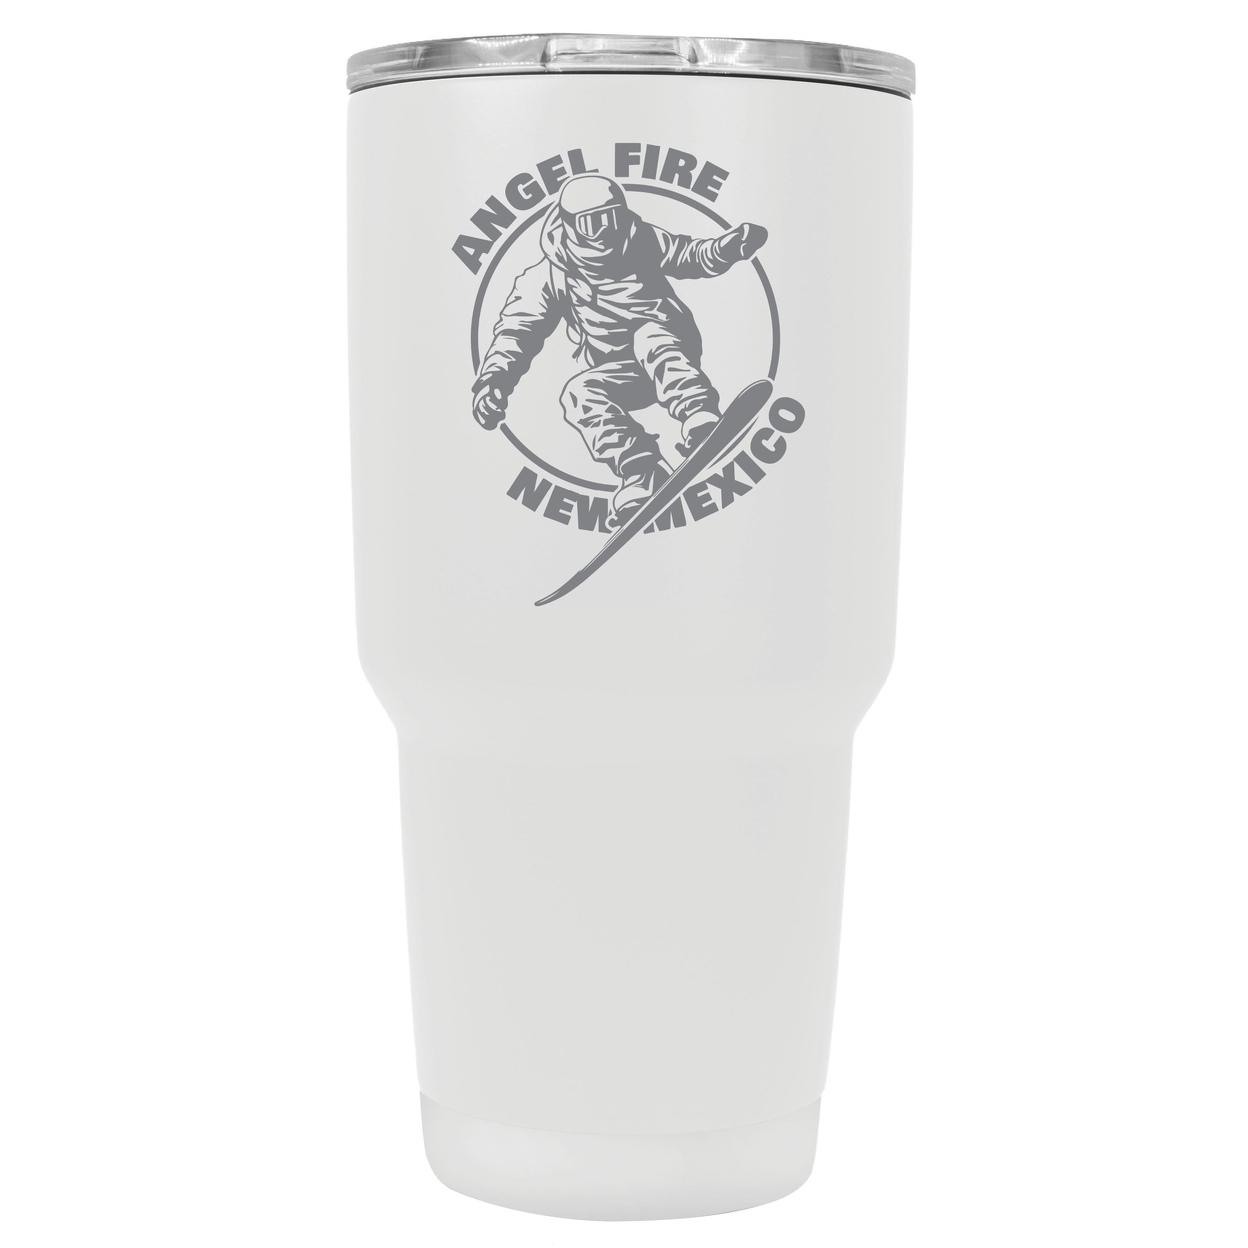 Angel Fire New Mexico Souvenir 24 Oz Engraved Insulated Stainless Steel Tumbler - Green,,2-Pack